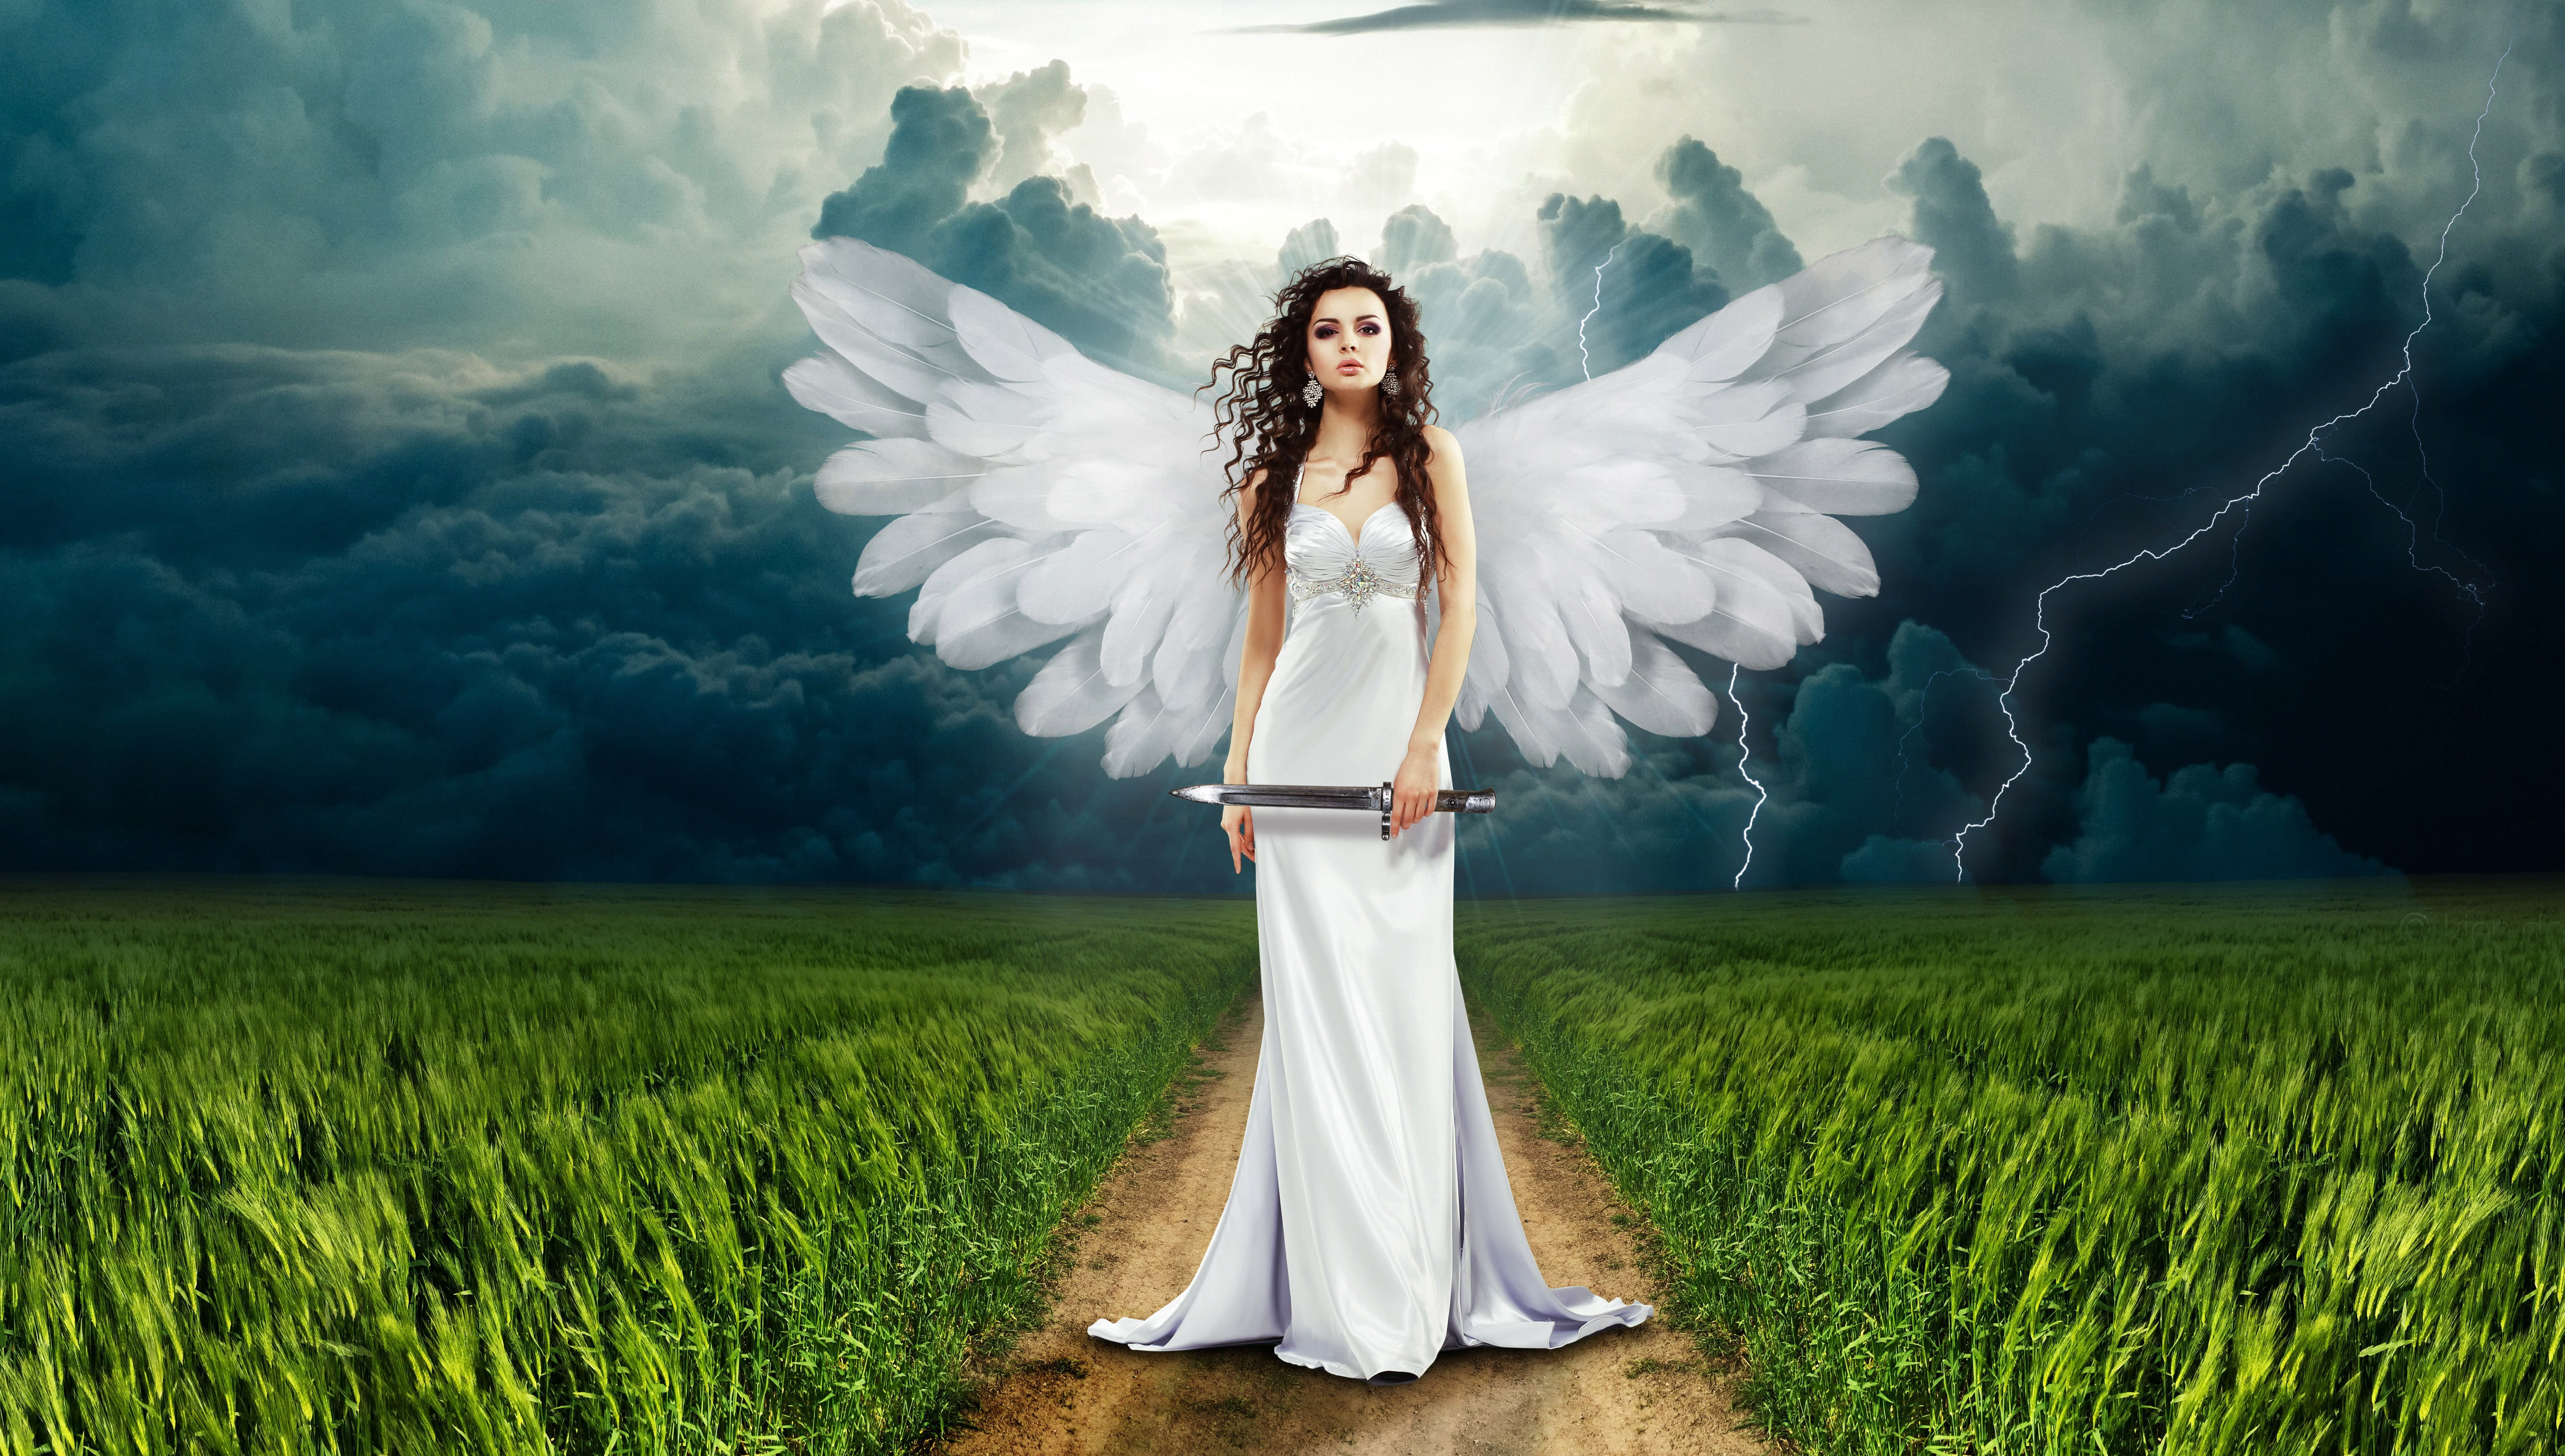 Female Angel with white wings and knife, angelic, clouds, photos